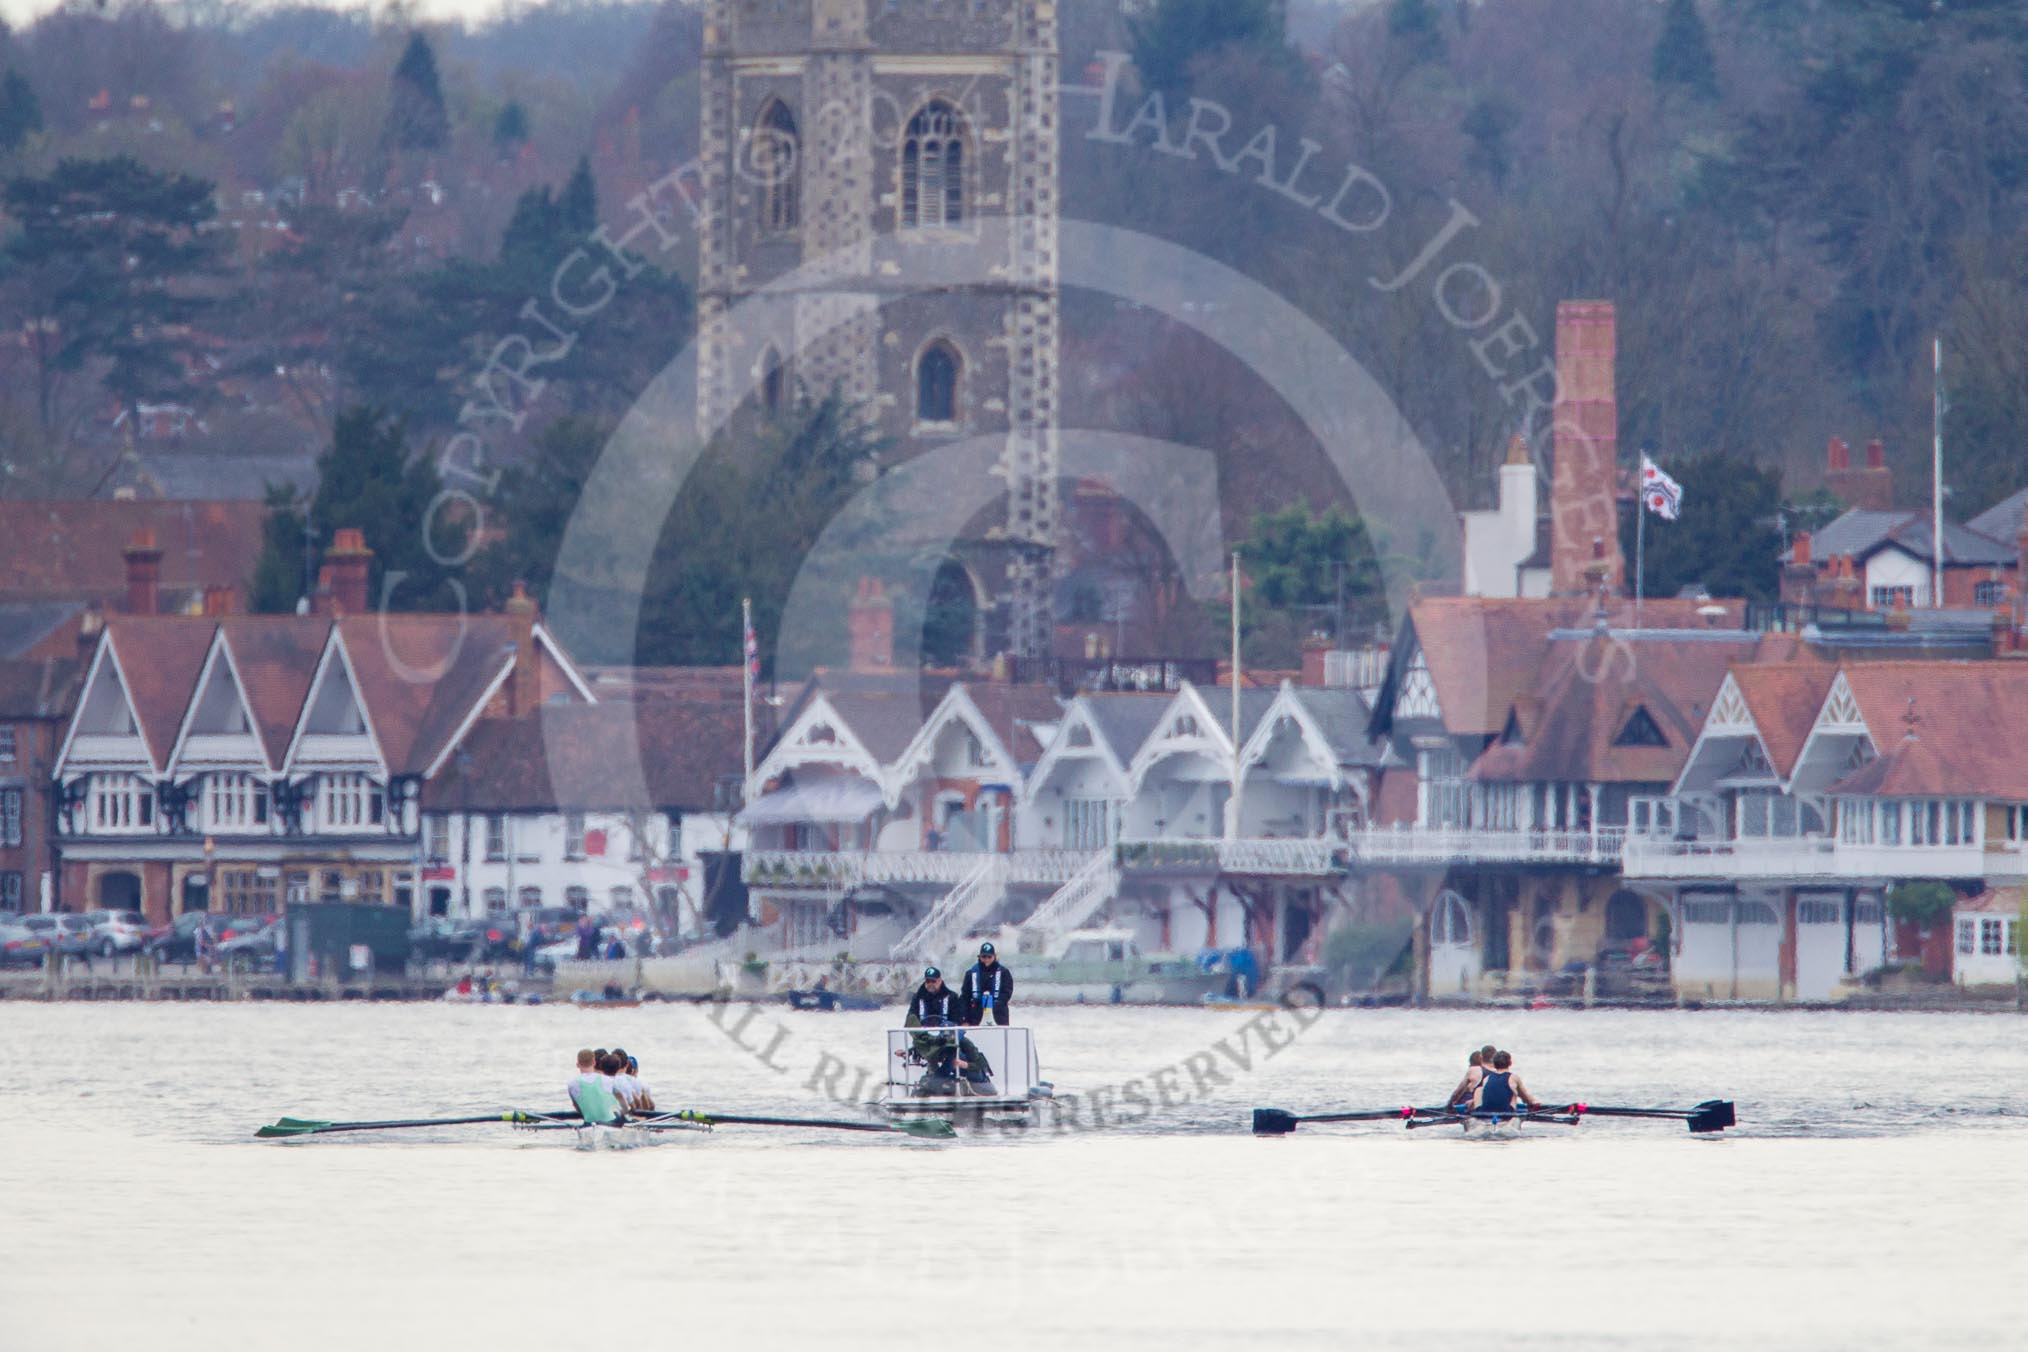 The Women's Boat Race and Henley Boat Races 2014: The Lightweight Men's Boat Race - OULRC vs CULRC, Oxford is on the right (Bucks) side, behind the boats is the umpire's launch..
River Thames,
Henley-on-Thames,
Buckinghamshire,
United Kingdom,
on 30 March 2014 at 15:38, image #356